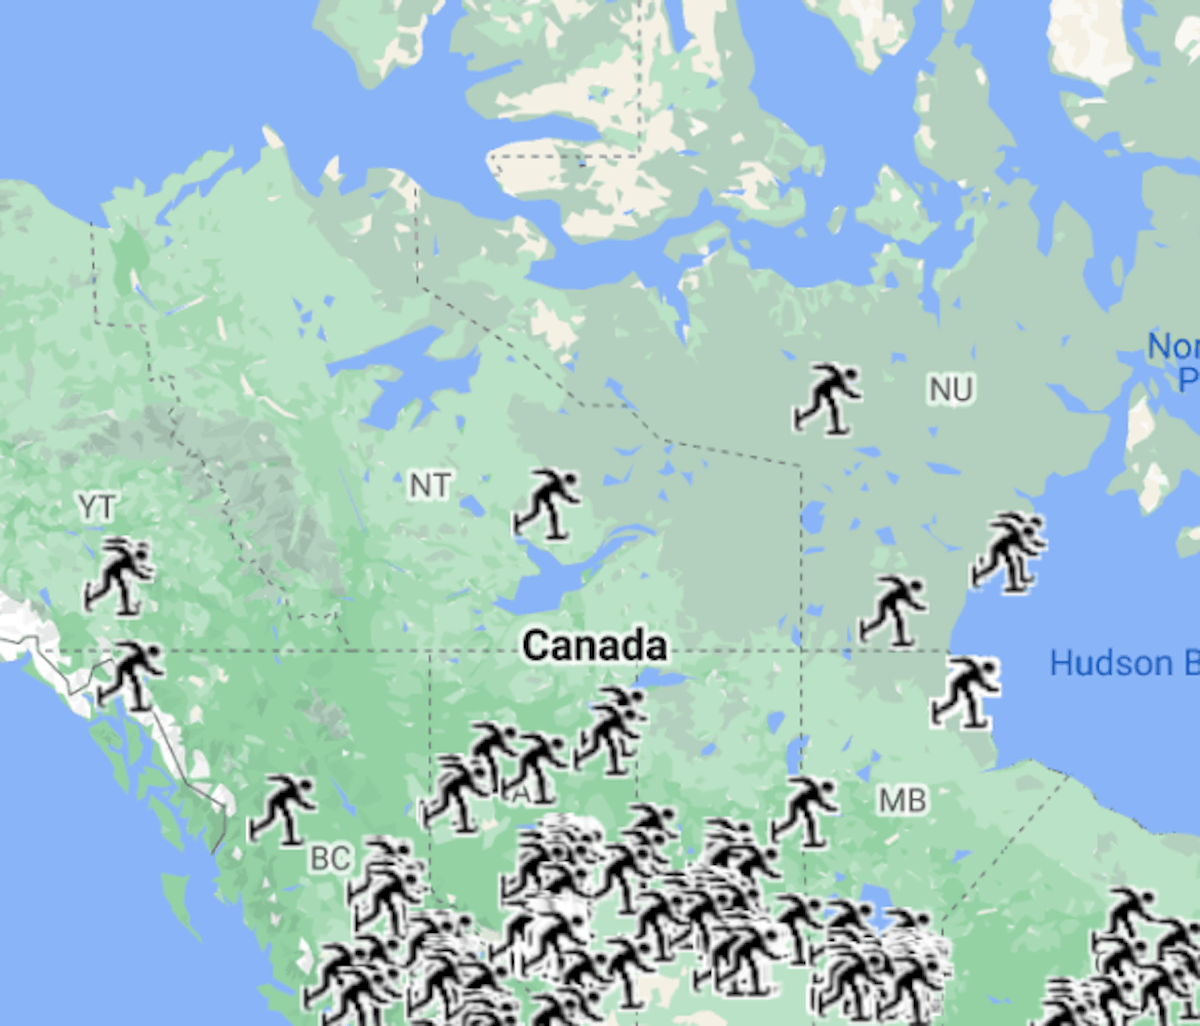 Illustration of multiple human figures dispersed across a map of canada.